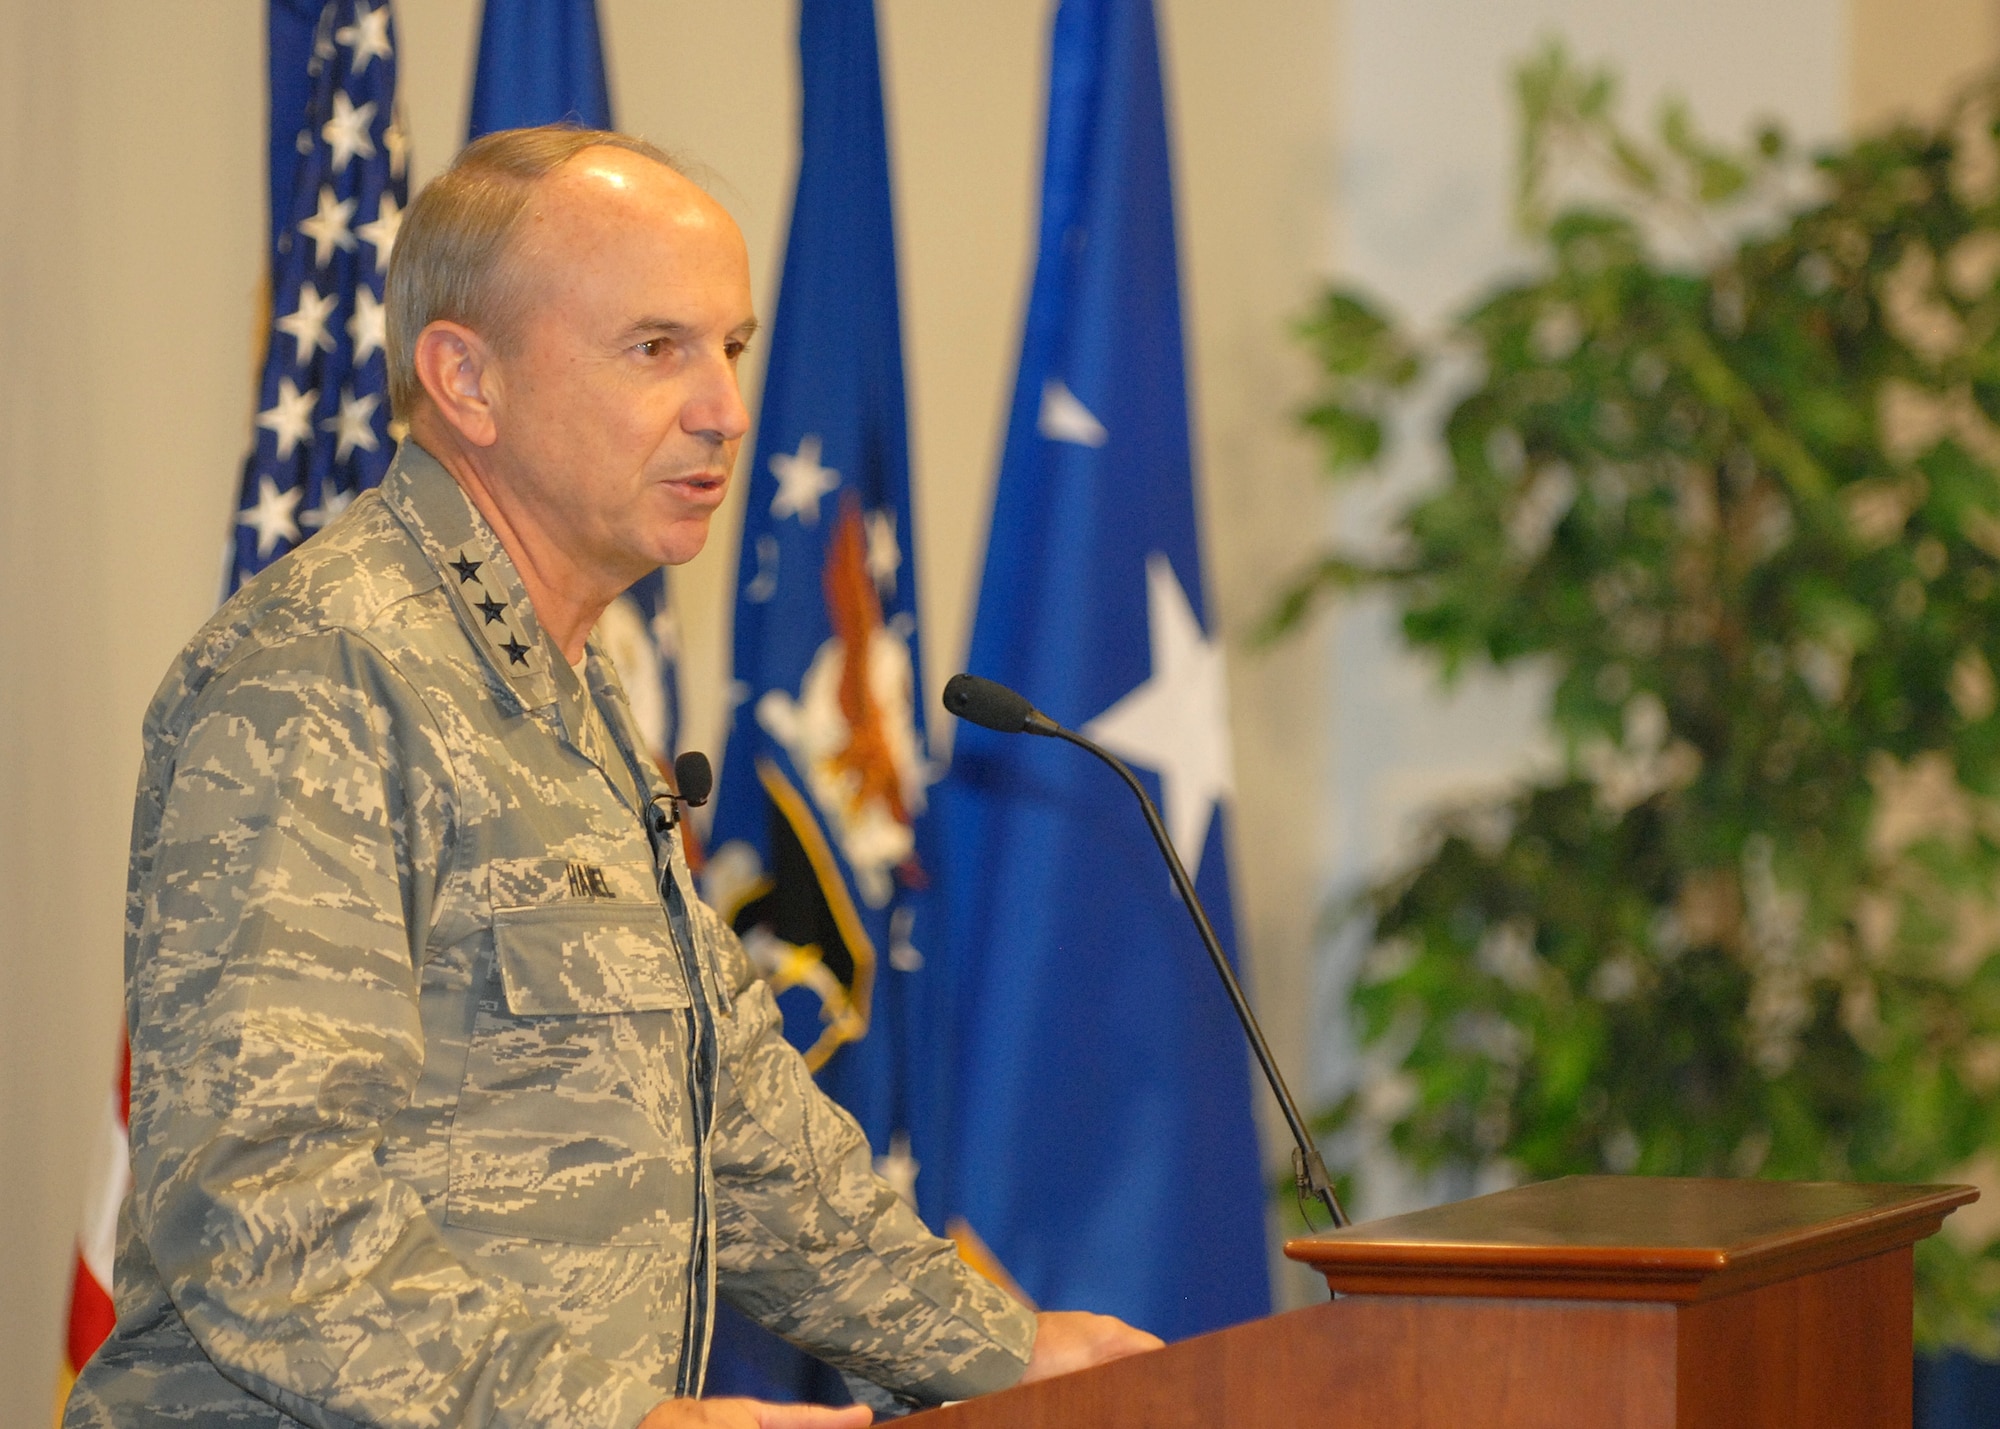 Lt. Gen Michael Hamel addressed base personnel at a Welcome Home Ceremony, Dec. 6. The event was held in conjunction with the base’s annual Wingman Day. (Photo by Stephen Schester)